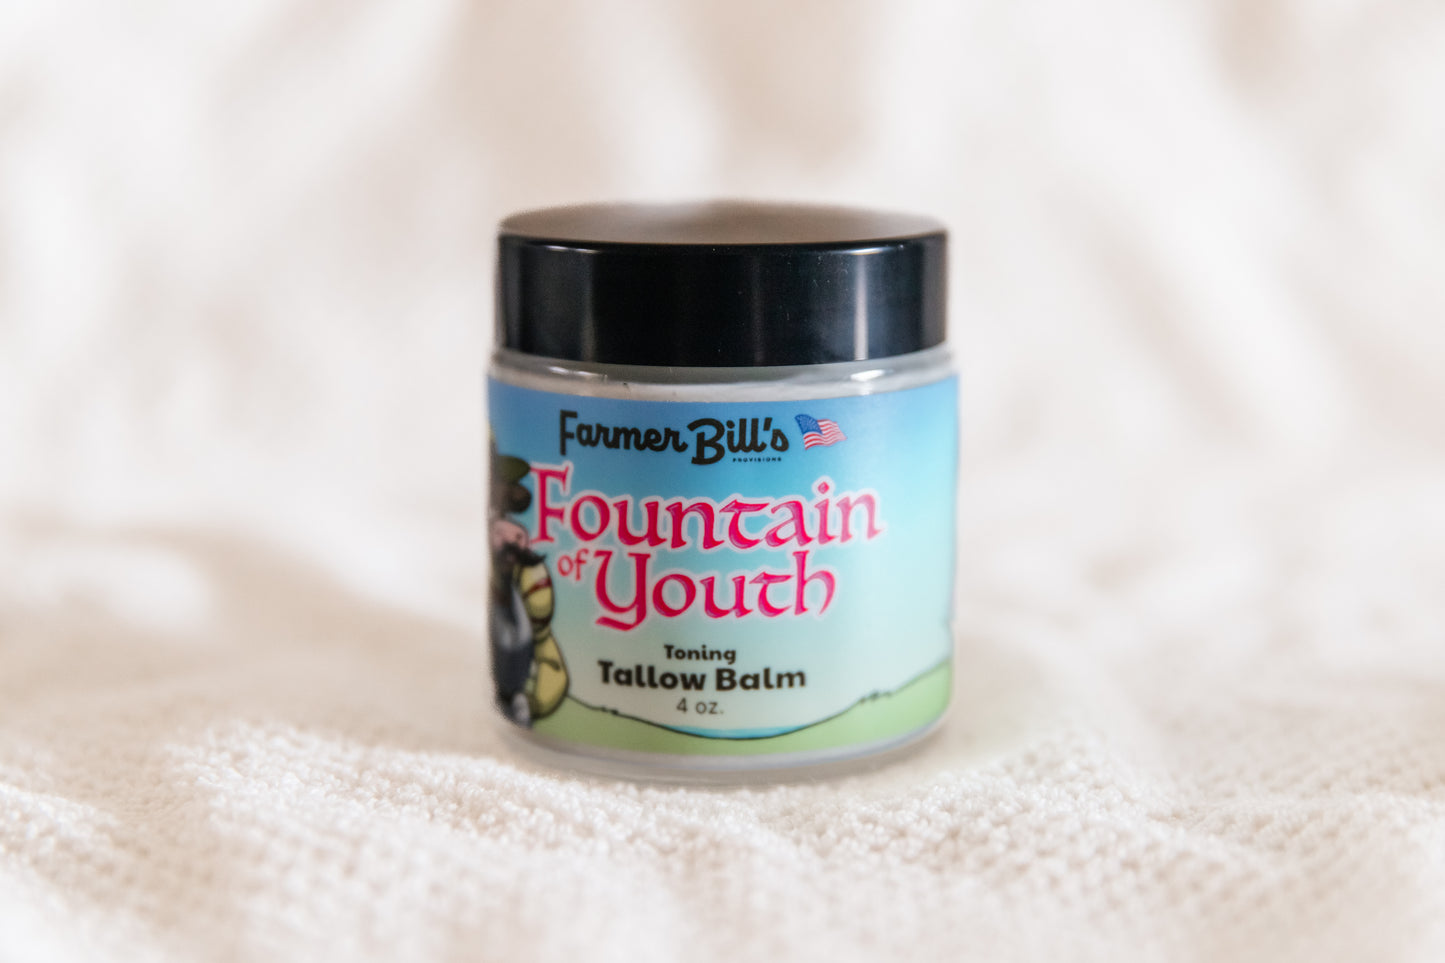 Fountain of Youth Toning Tallow Balm 4 oz.